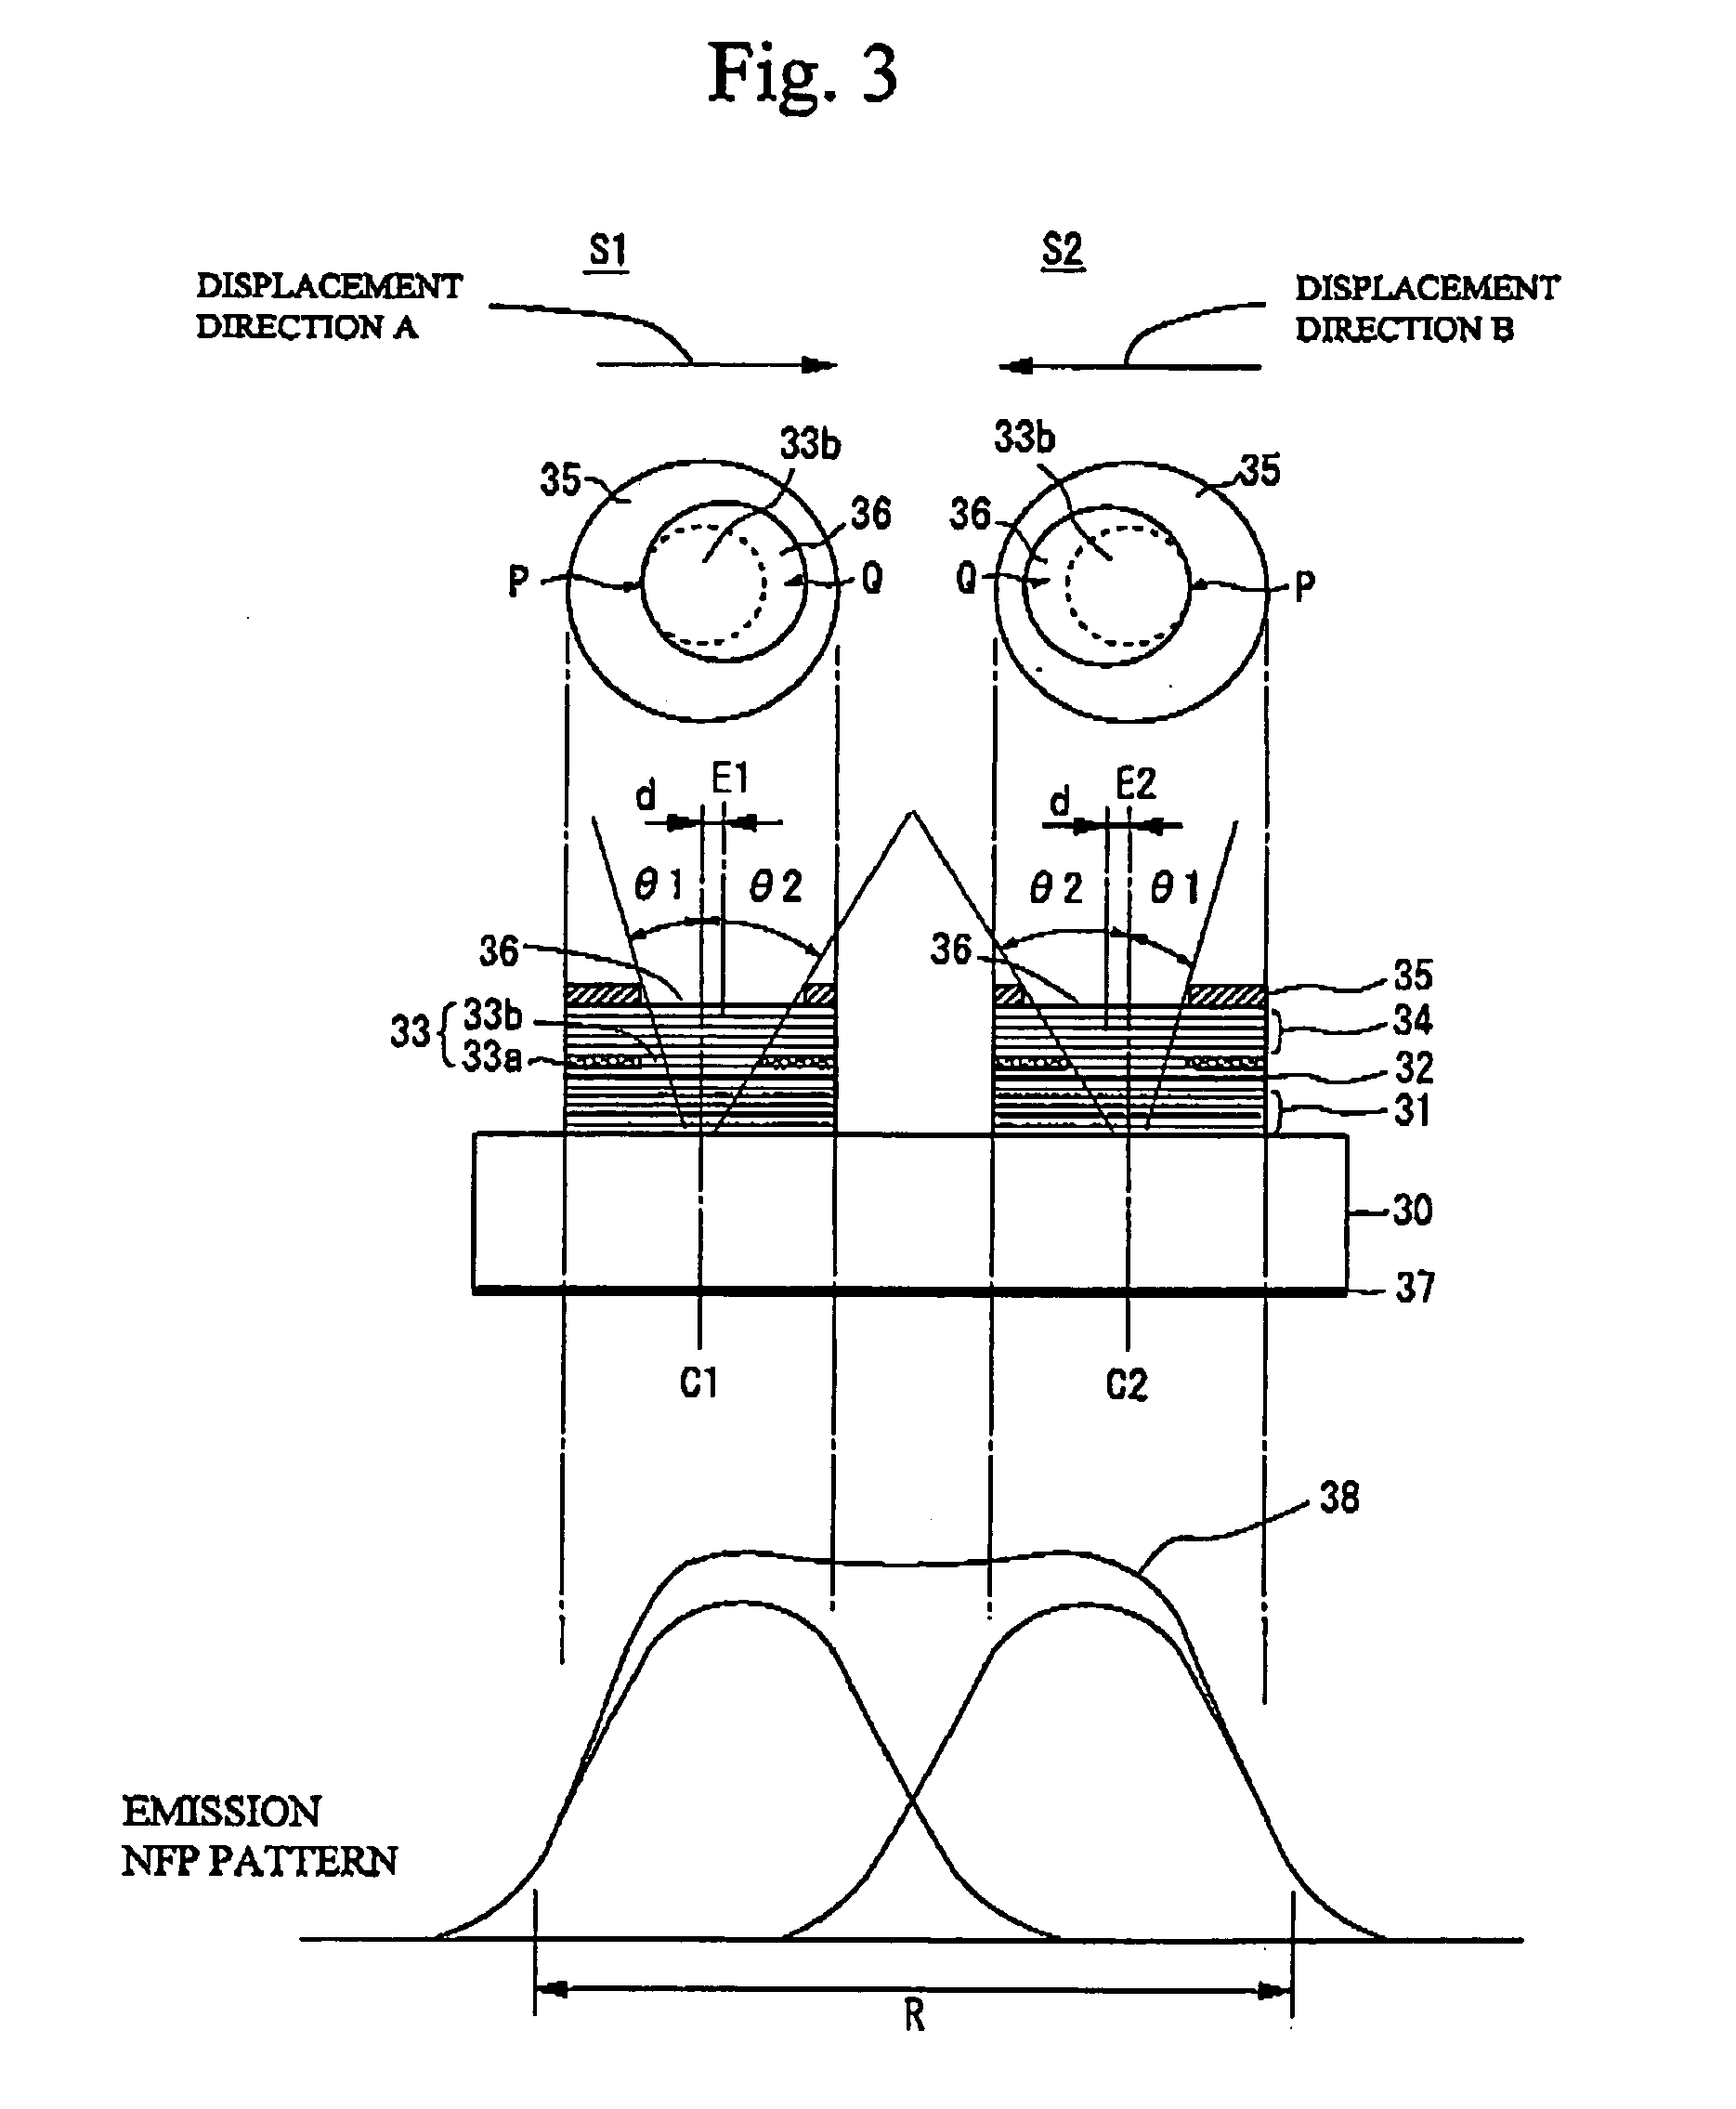 Surface emitting semiconductor laser array and optical transmission system using the same